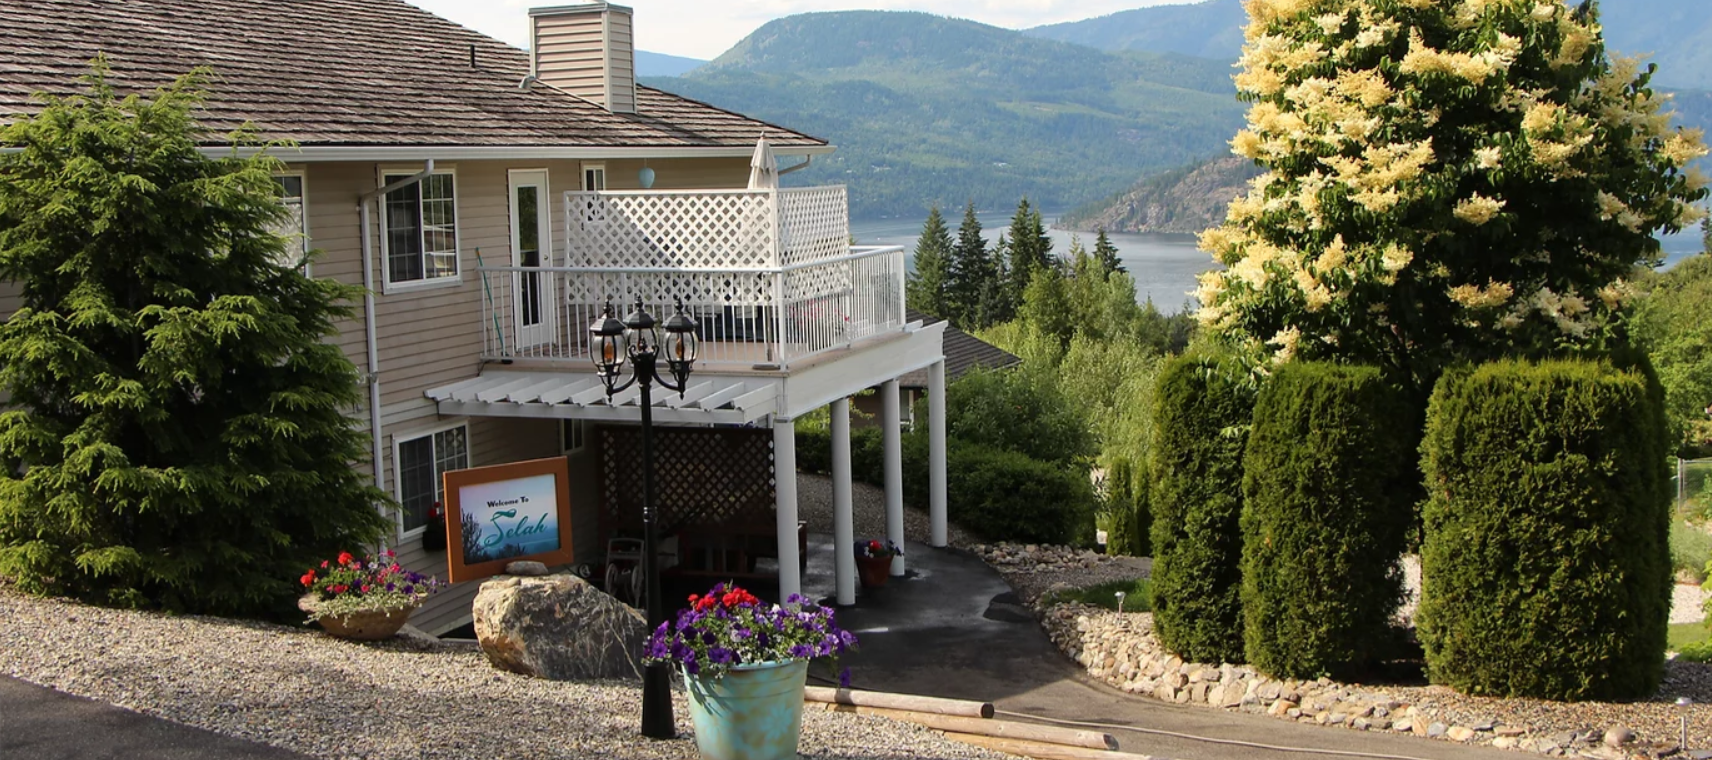 Selah Retreat Guesthouse B&B: Selah Retreat B&B is located in the interior of British Columbia above the sunny Shuswap where guests may enjoy spectacular lake and mountain views. Our rooms are clean and cozy, […]